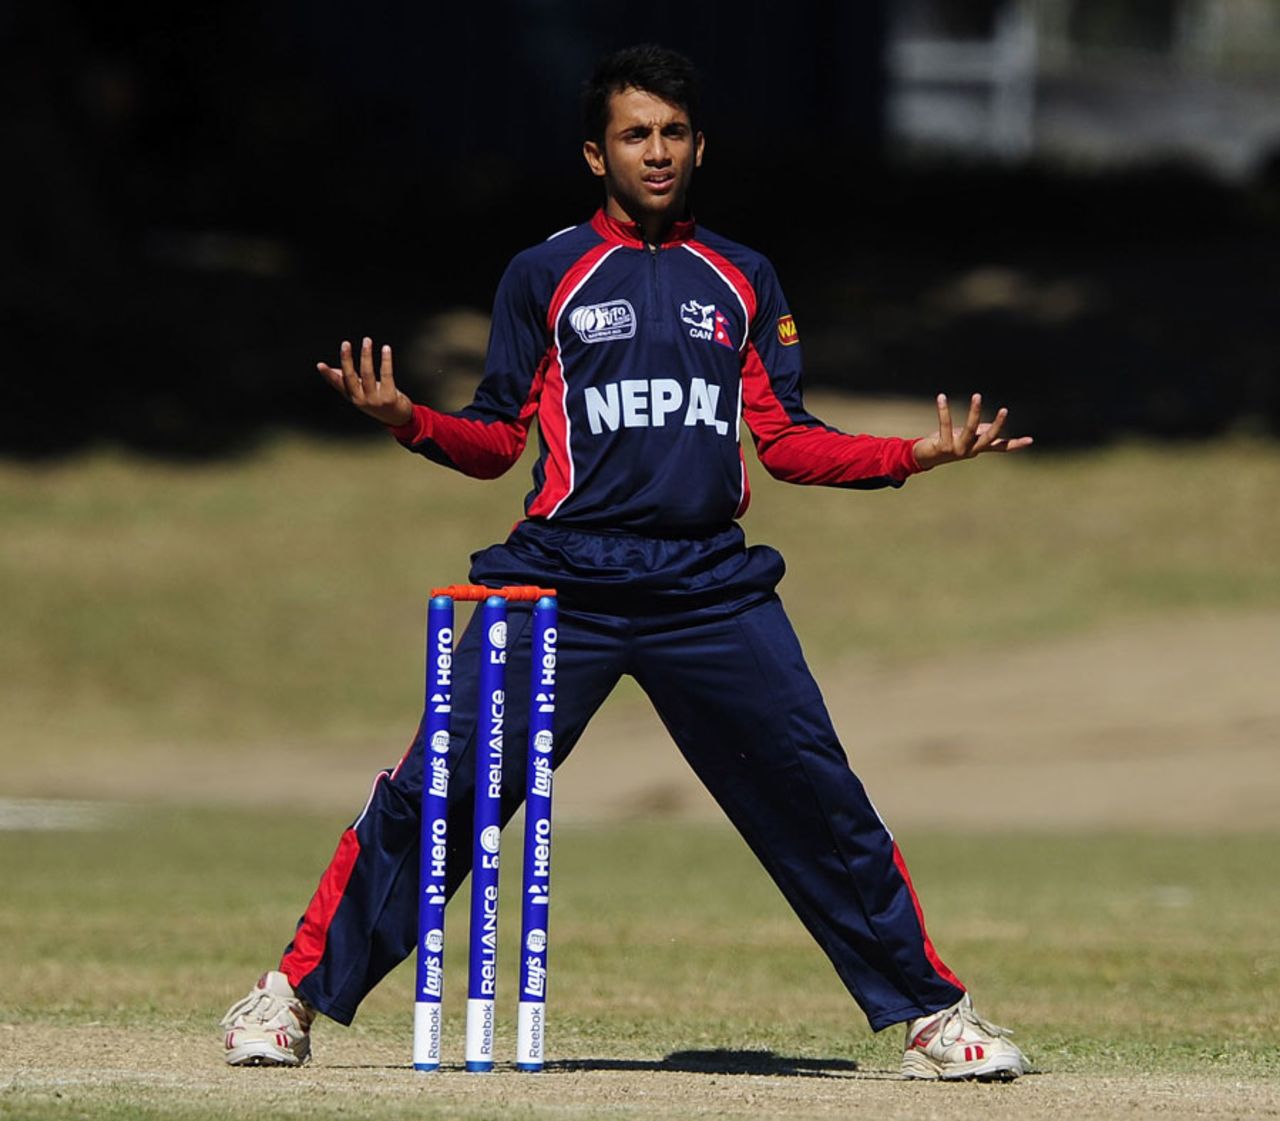 Nepal captain Prithu Baskota dismissed the Ireland openers, Ireland v Nepal, Group A, ICC Under-19 World Cup 2012, Townsville, August 15, 2012